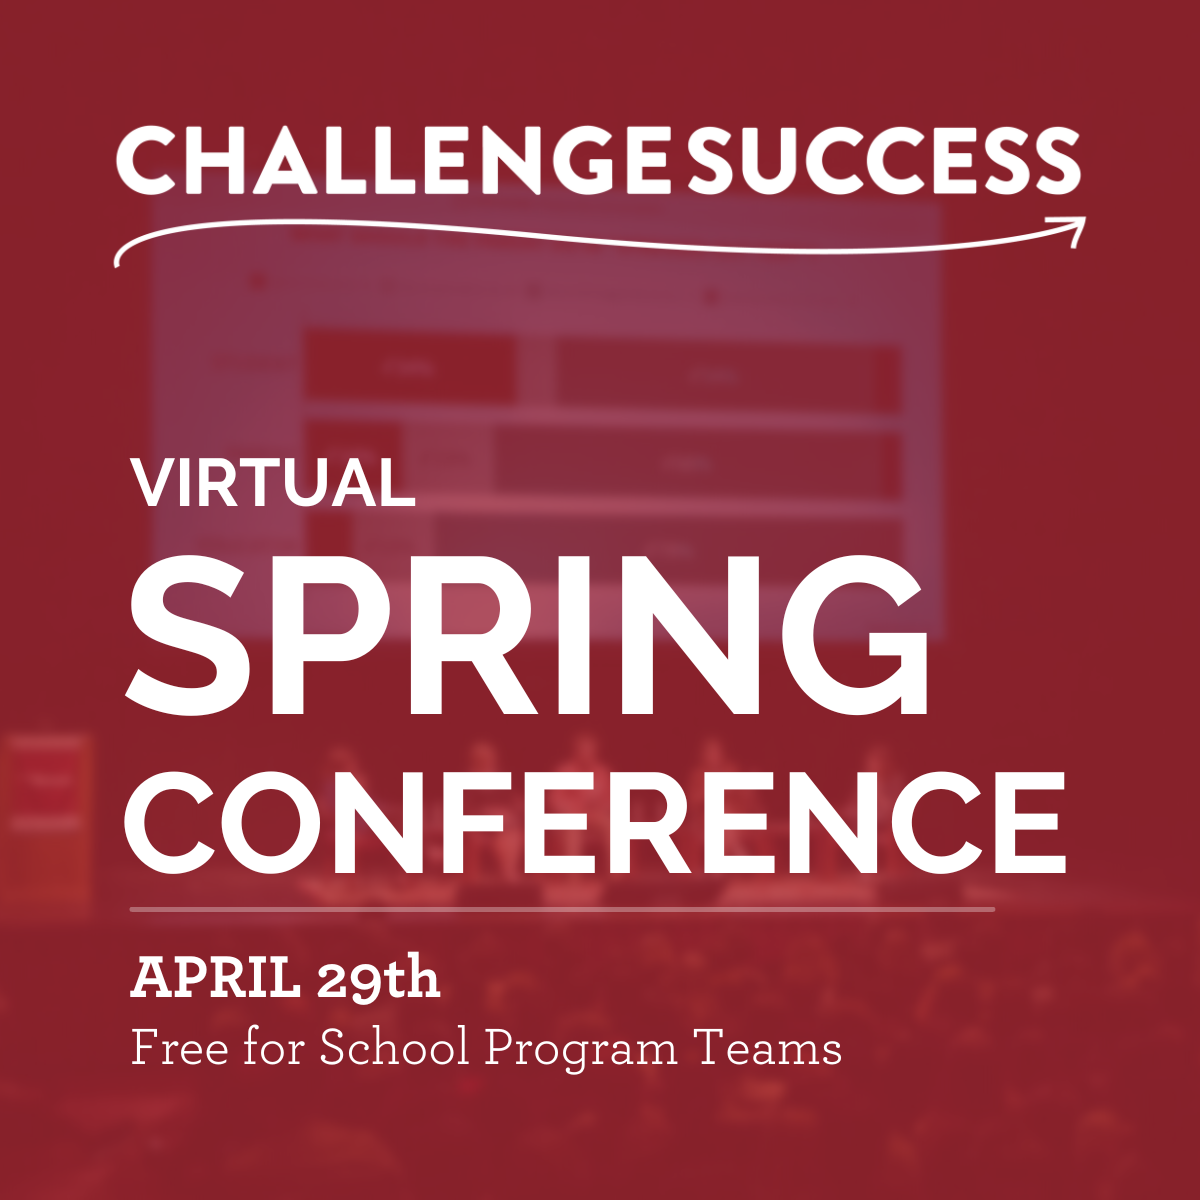 2023 Virtual Spring Conference Challenge Success